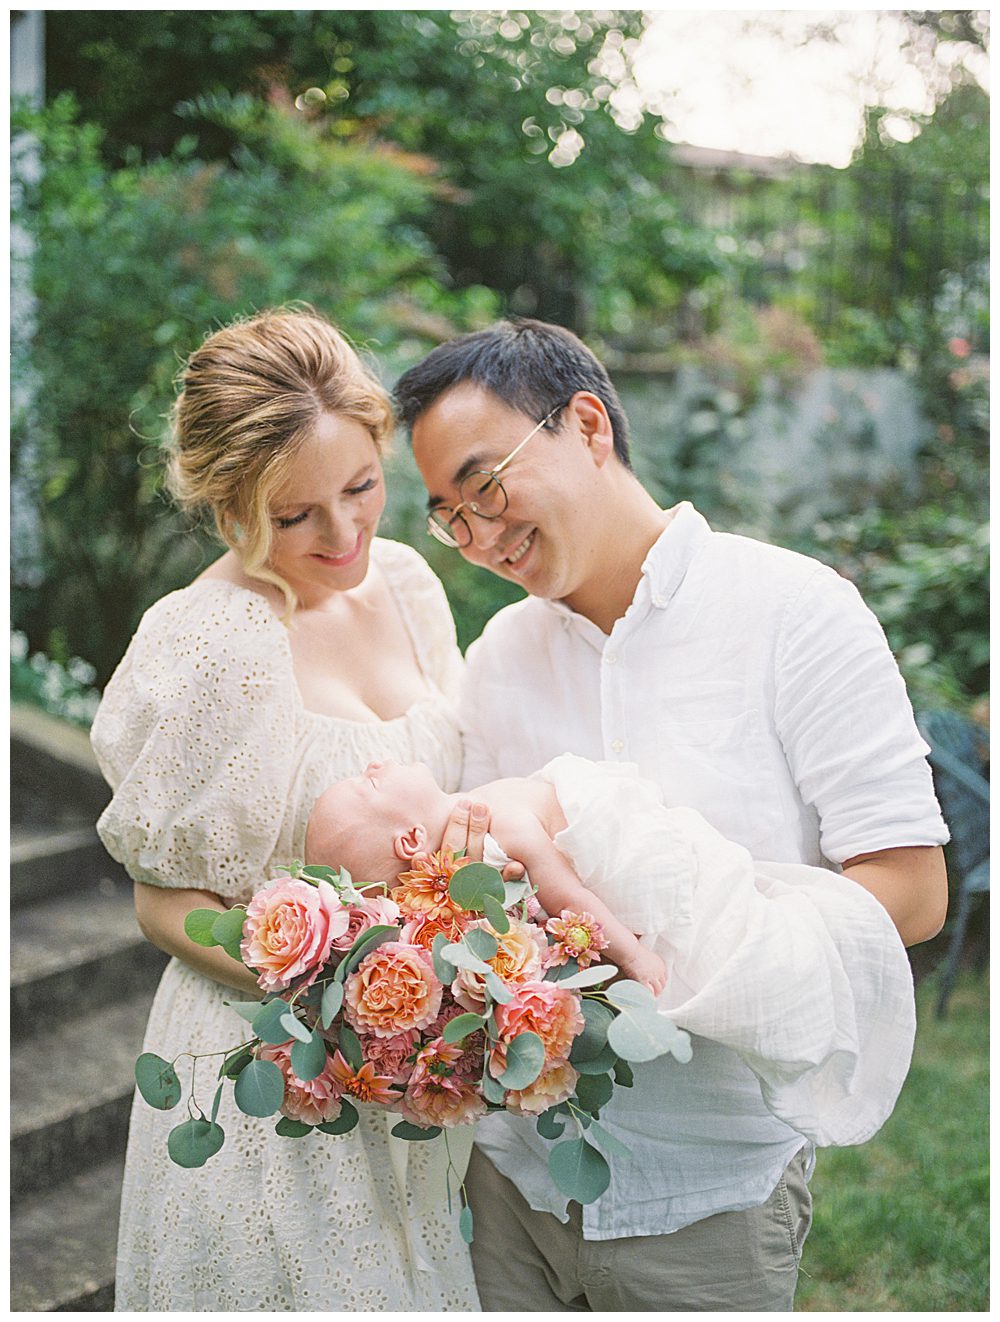 New parents hold newborn baby with bouquet of roses during their Alexandria VA newborn session in a garden.